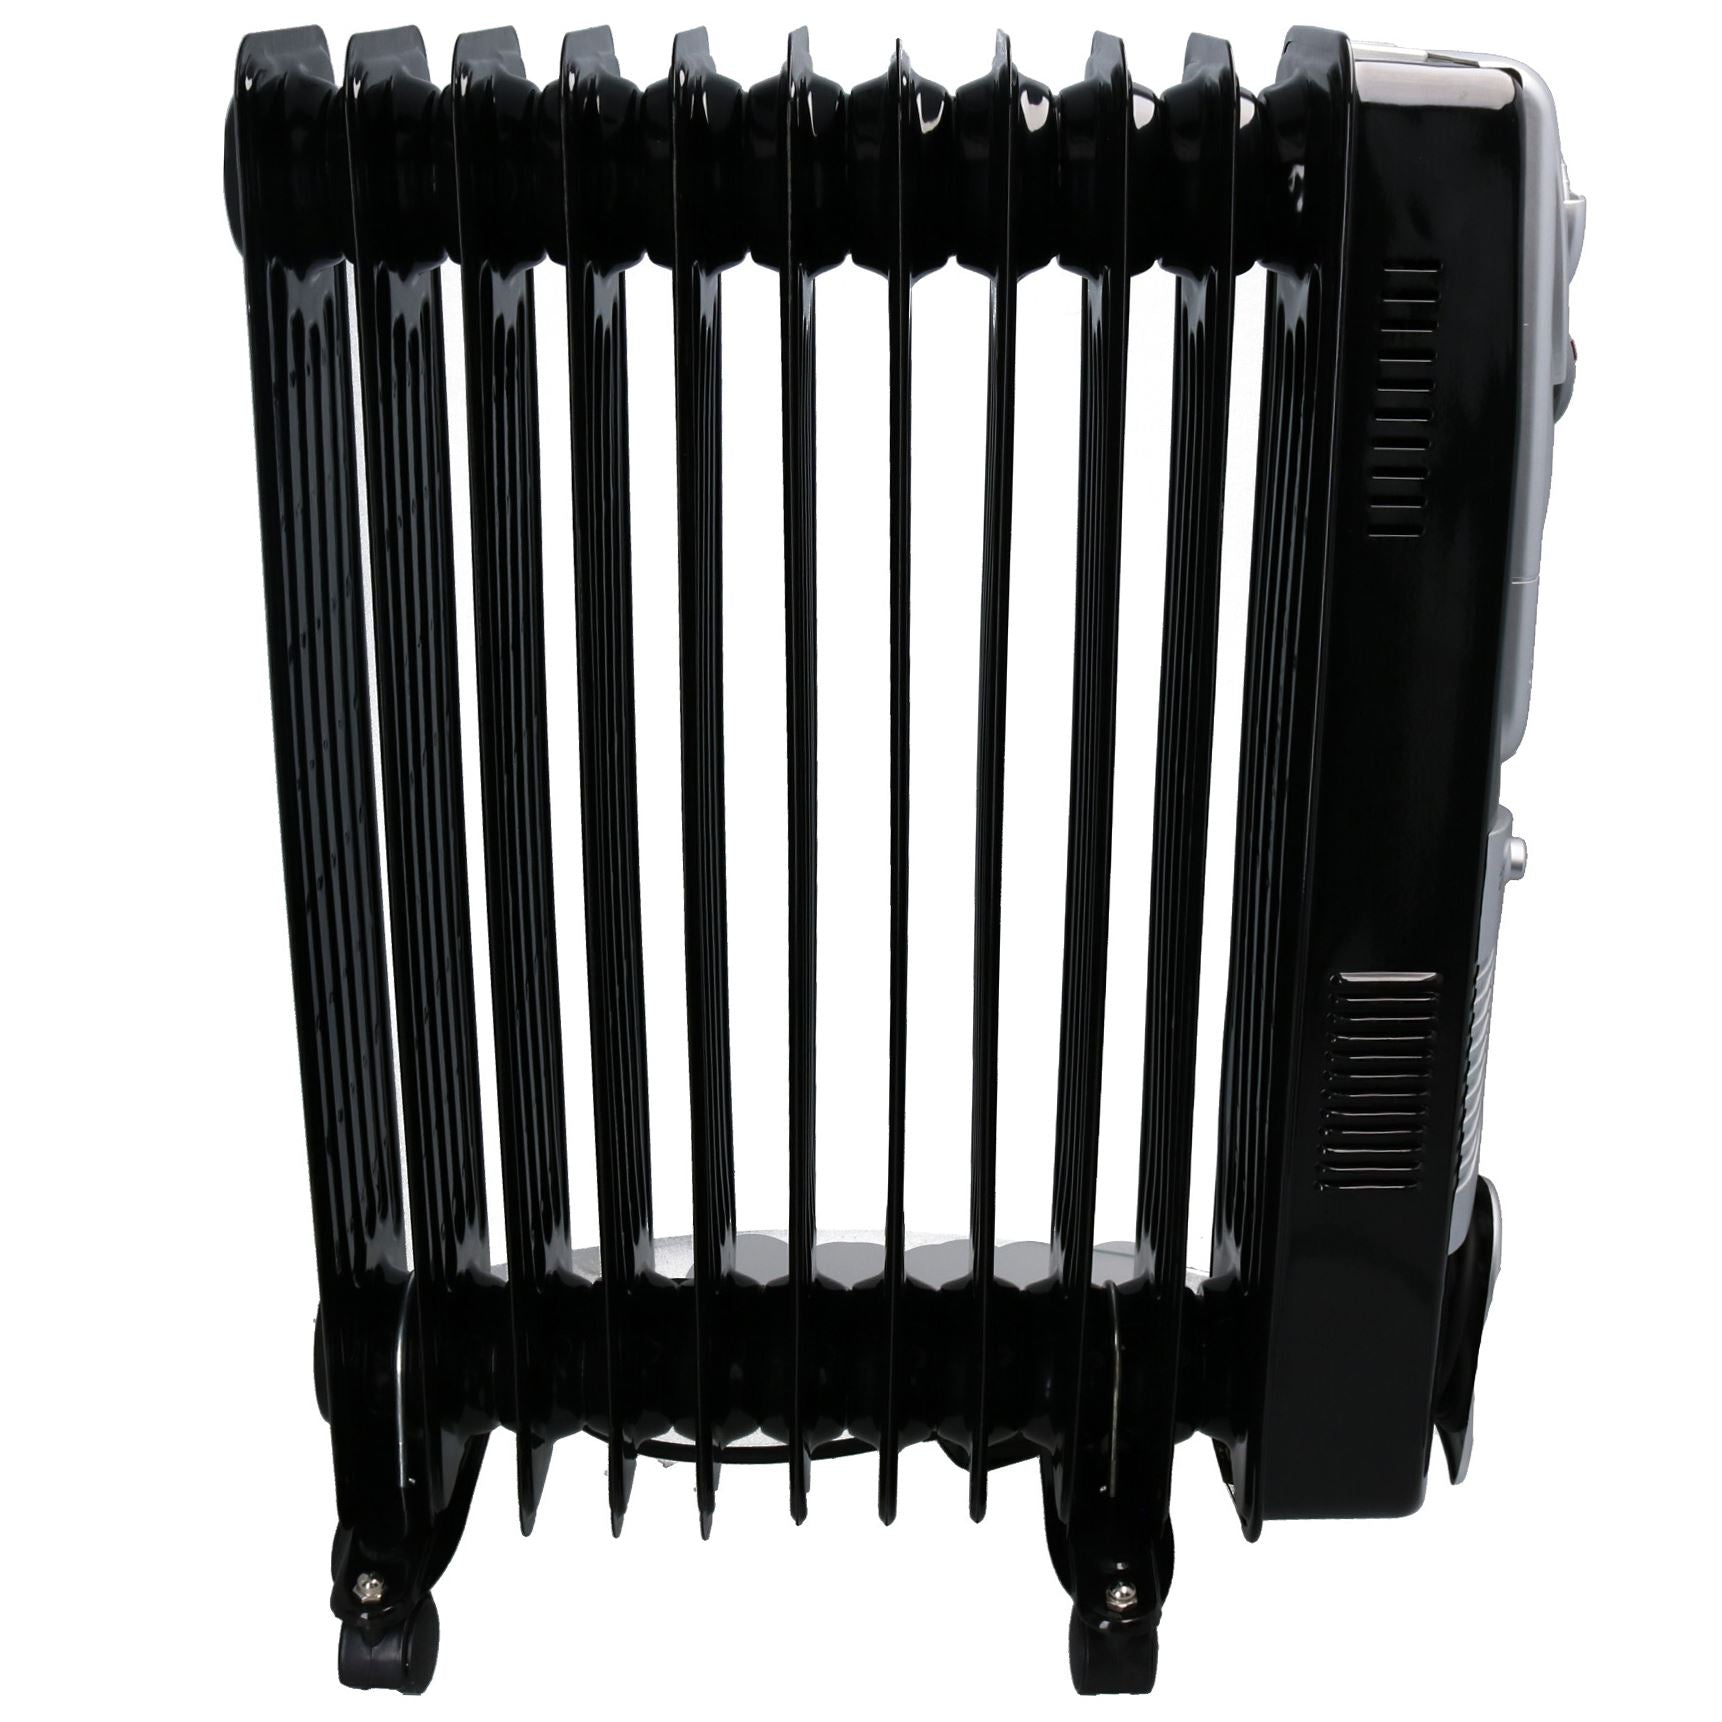 2KW 11 Fin Oil Filled Portable Electric Radiator Heater with Turbo fan + 24hr Timer